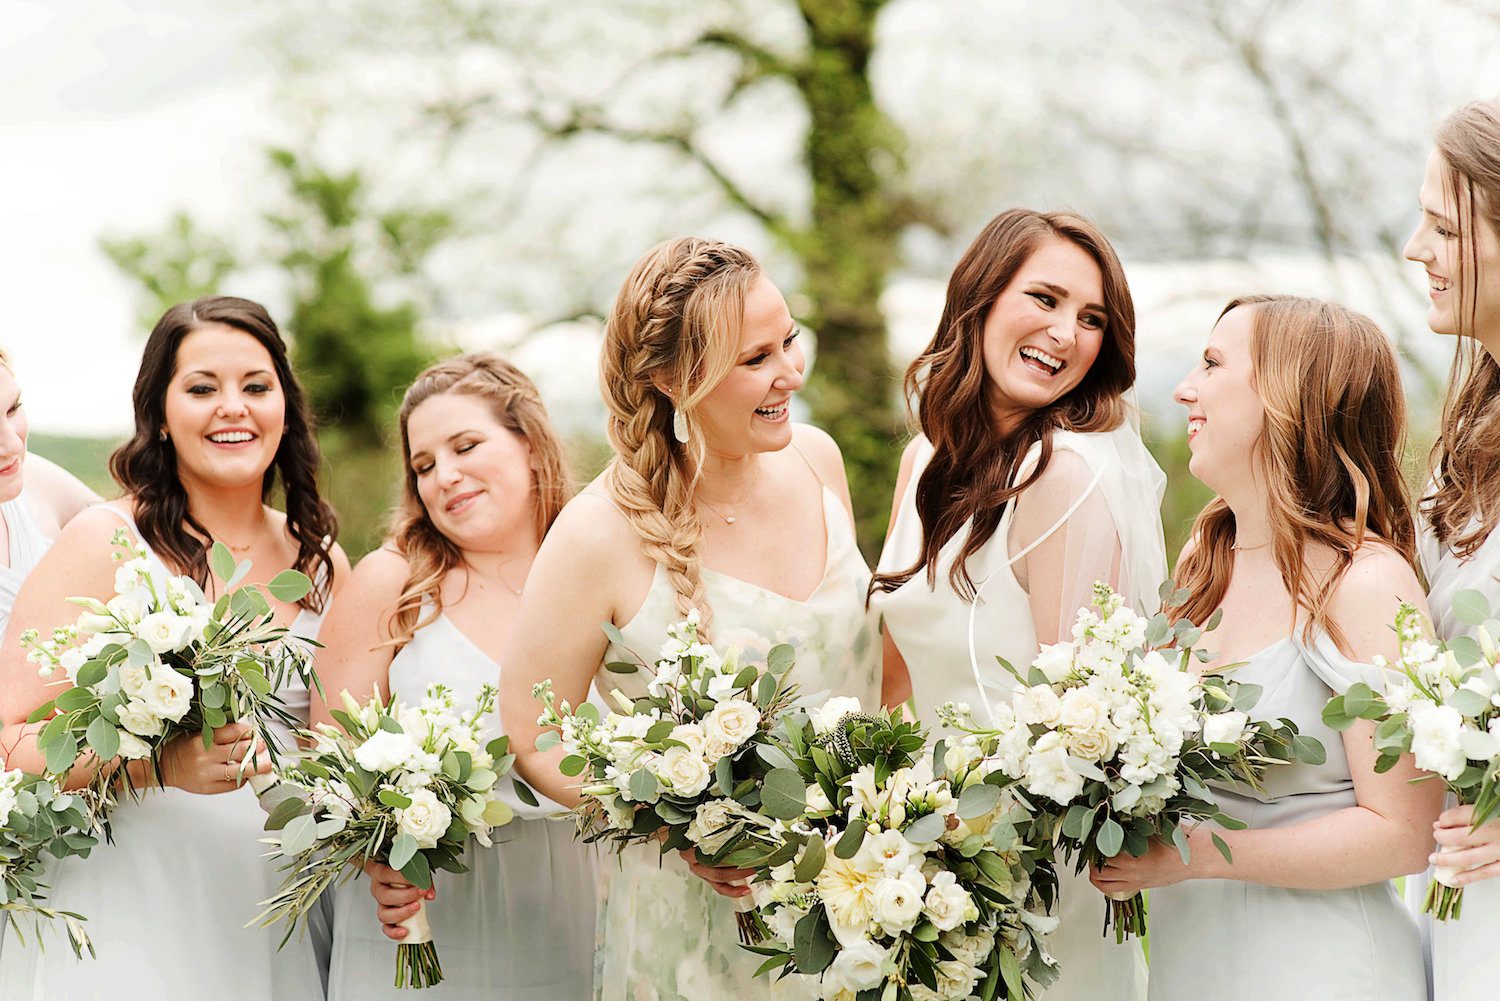 Light grey bridesmaids dresses perfect for this neutral palette. Photography taken at Raspberry Plain Manor in Leesburg, Virginia by the Photography Smiths.